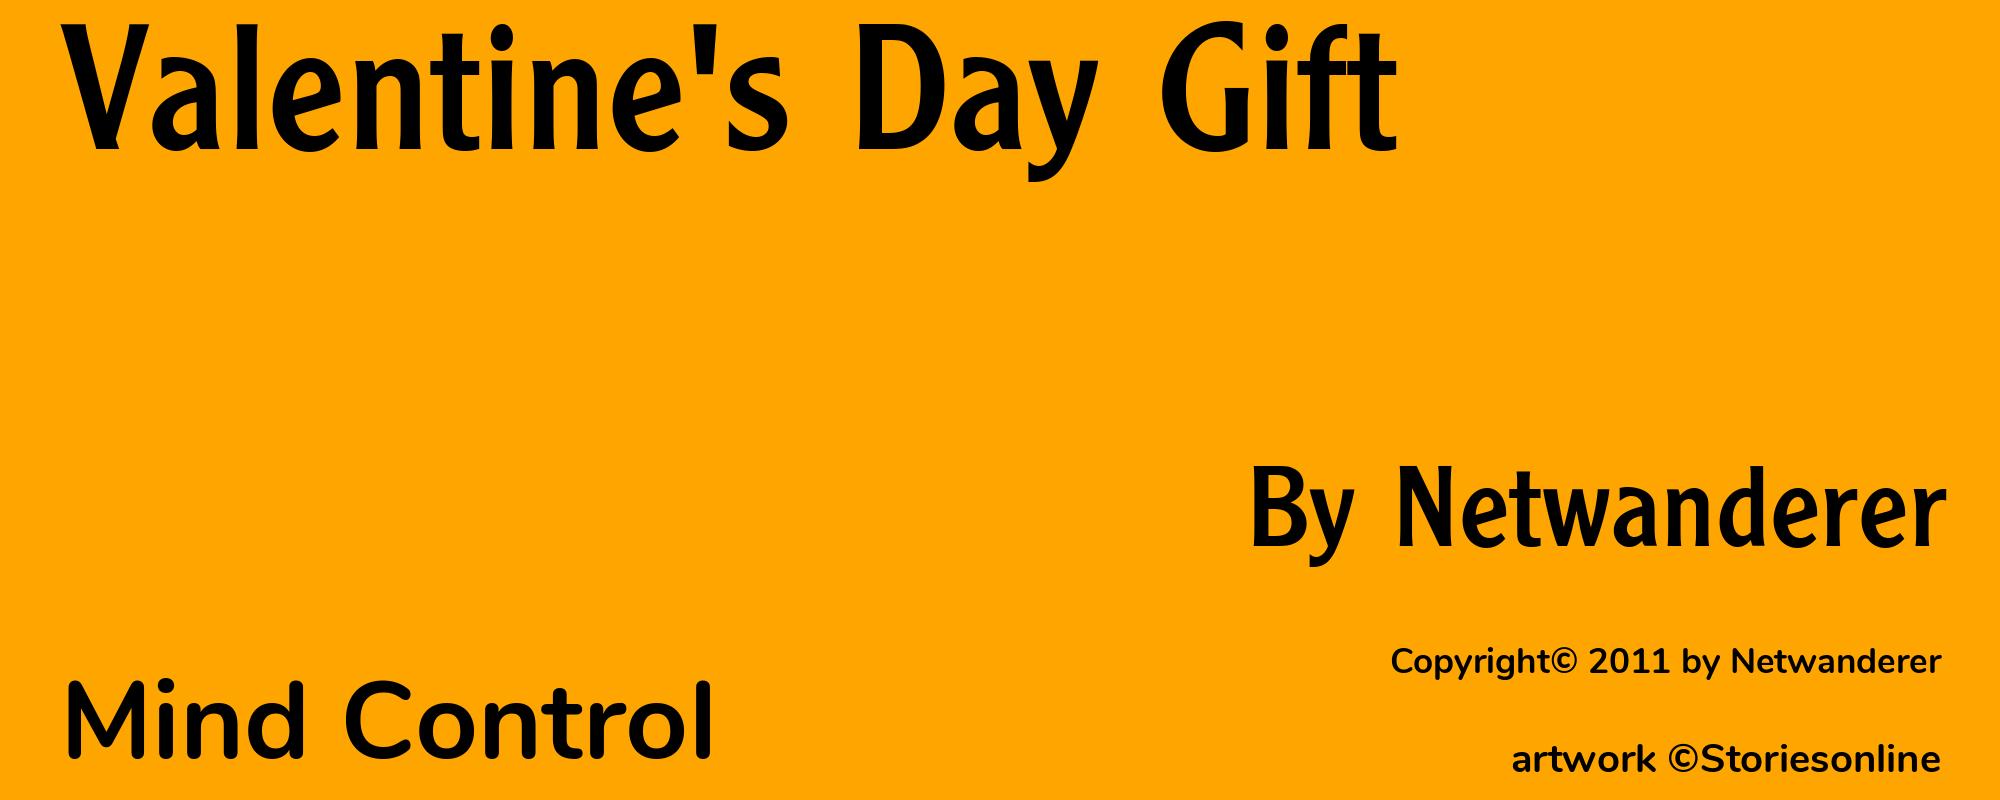 Valentine's Day Gift - Cover